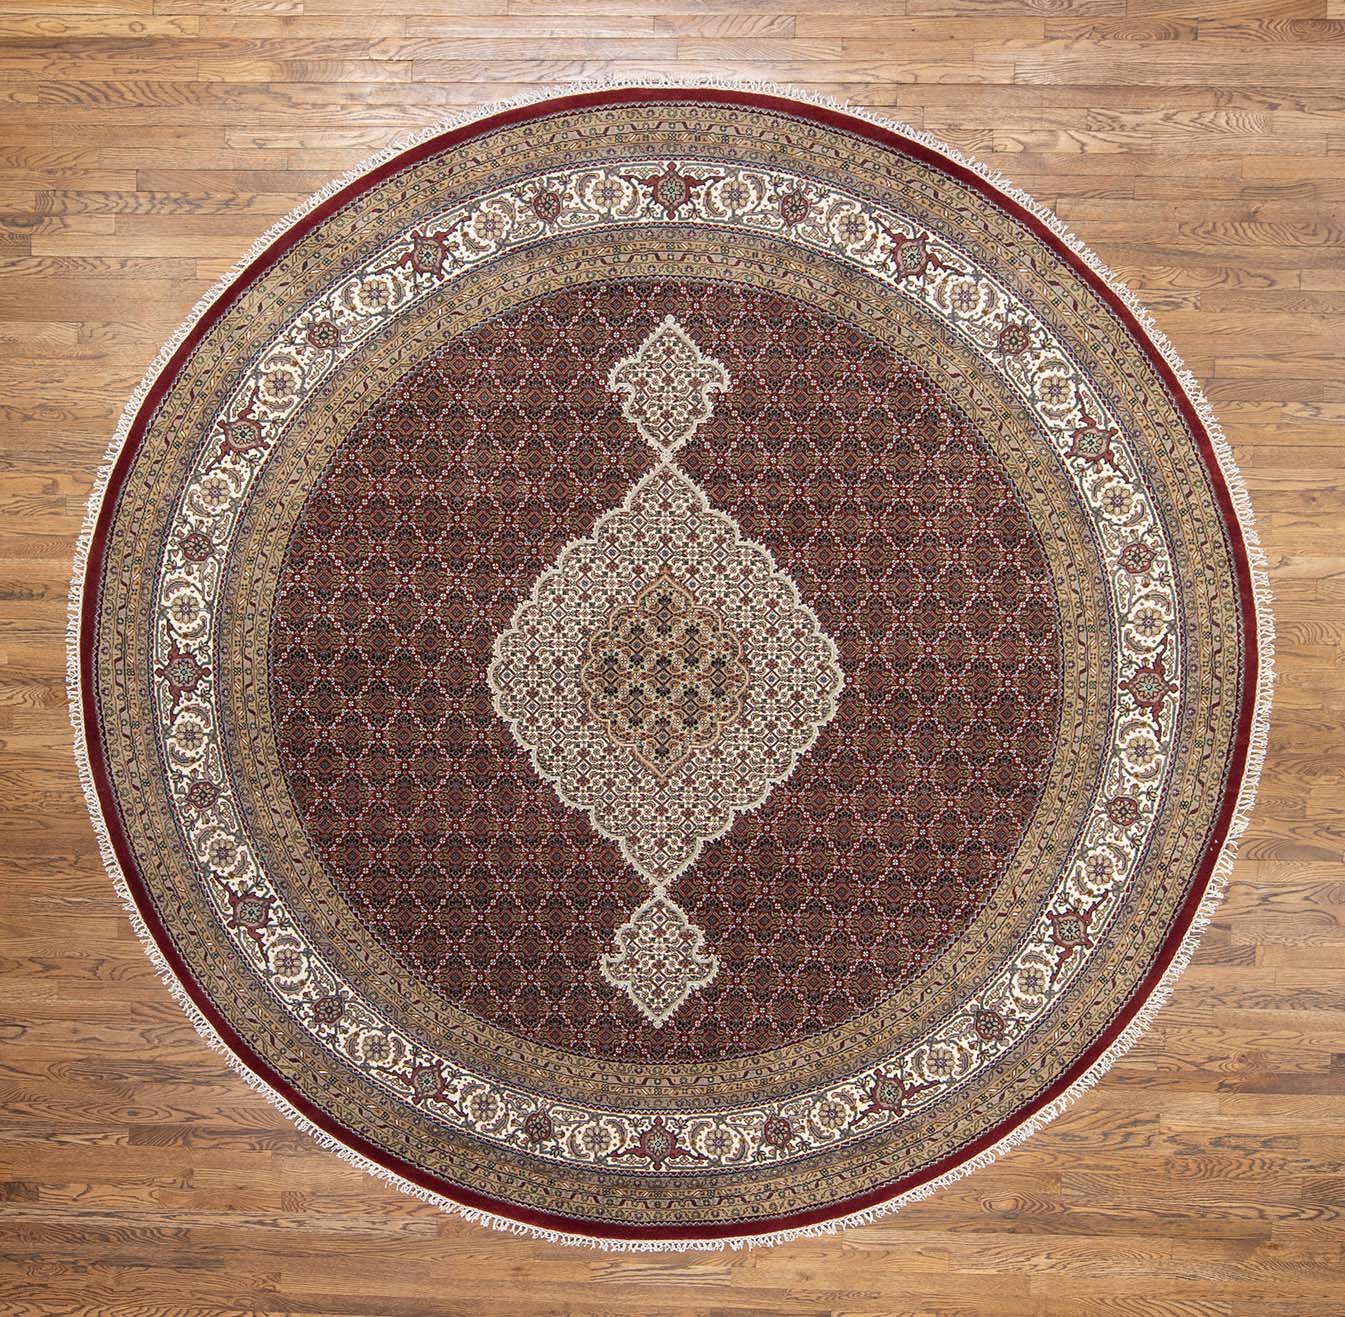 10 Round Rugs For Every Budget